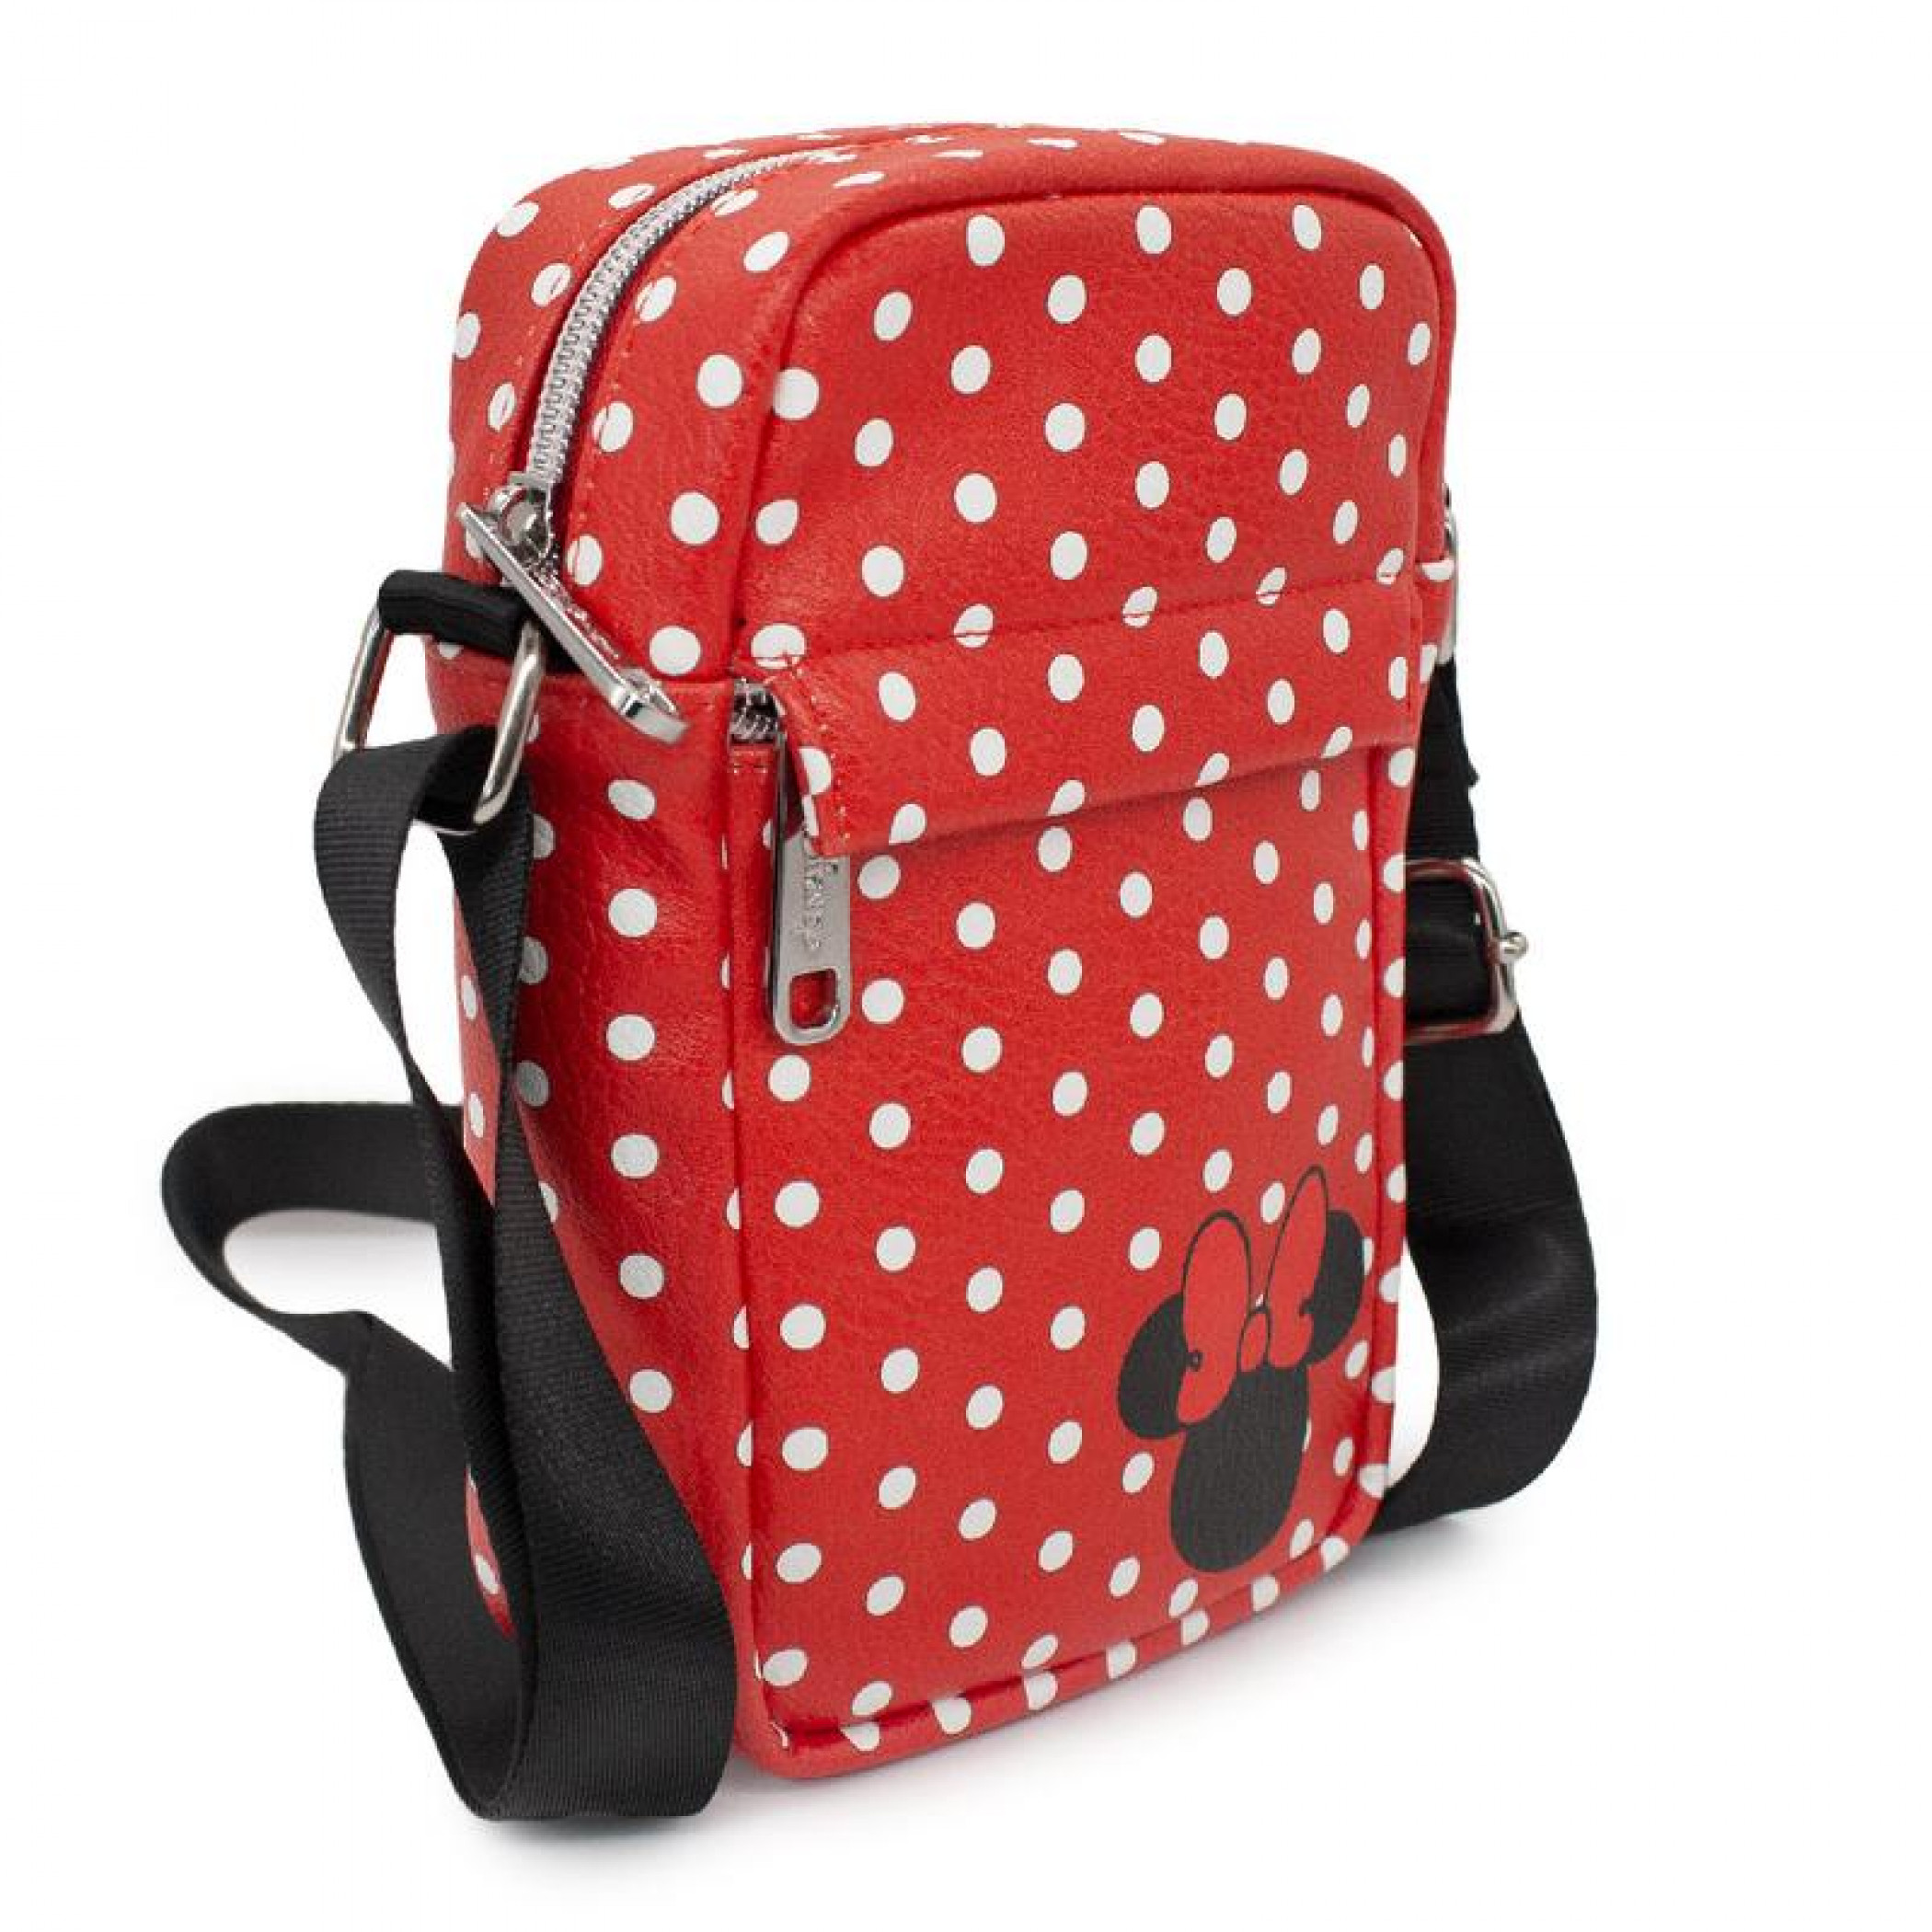 Disney Minnie Mouse Polka Dots with Ears and Bow Crossbody Bag